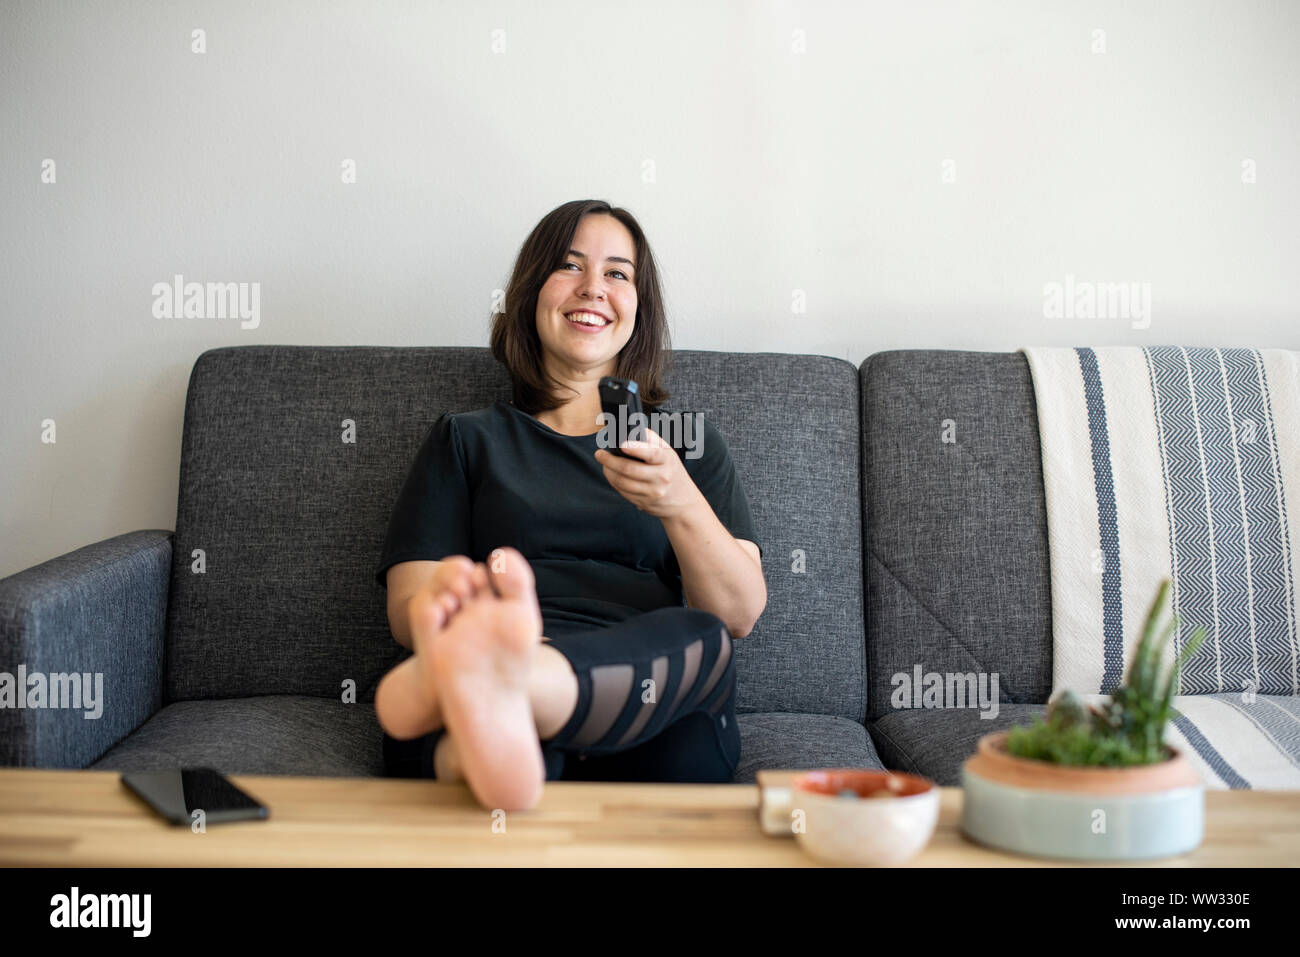 Woman Sitting On Couch With Feet Up With Remote Stock Photo Alamy